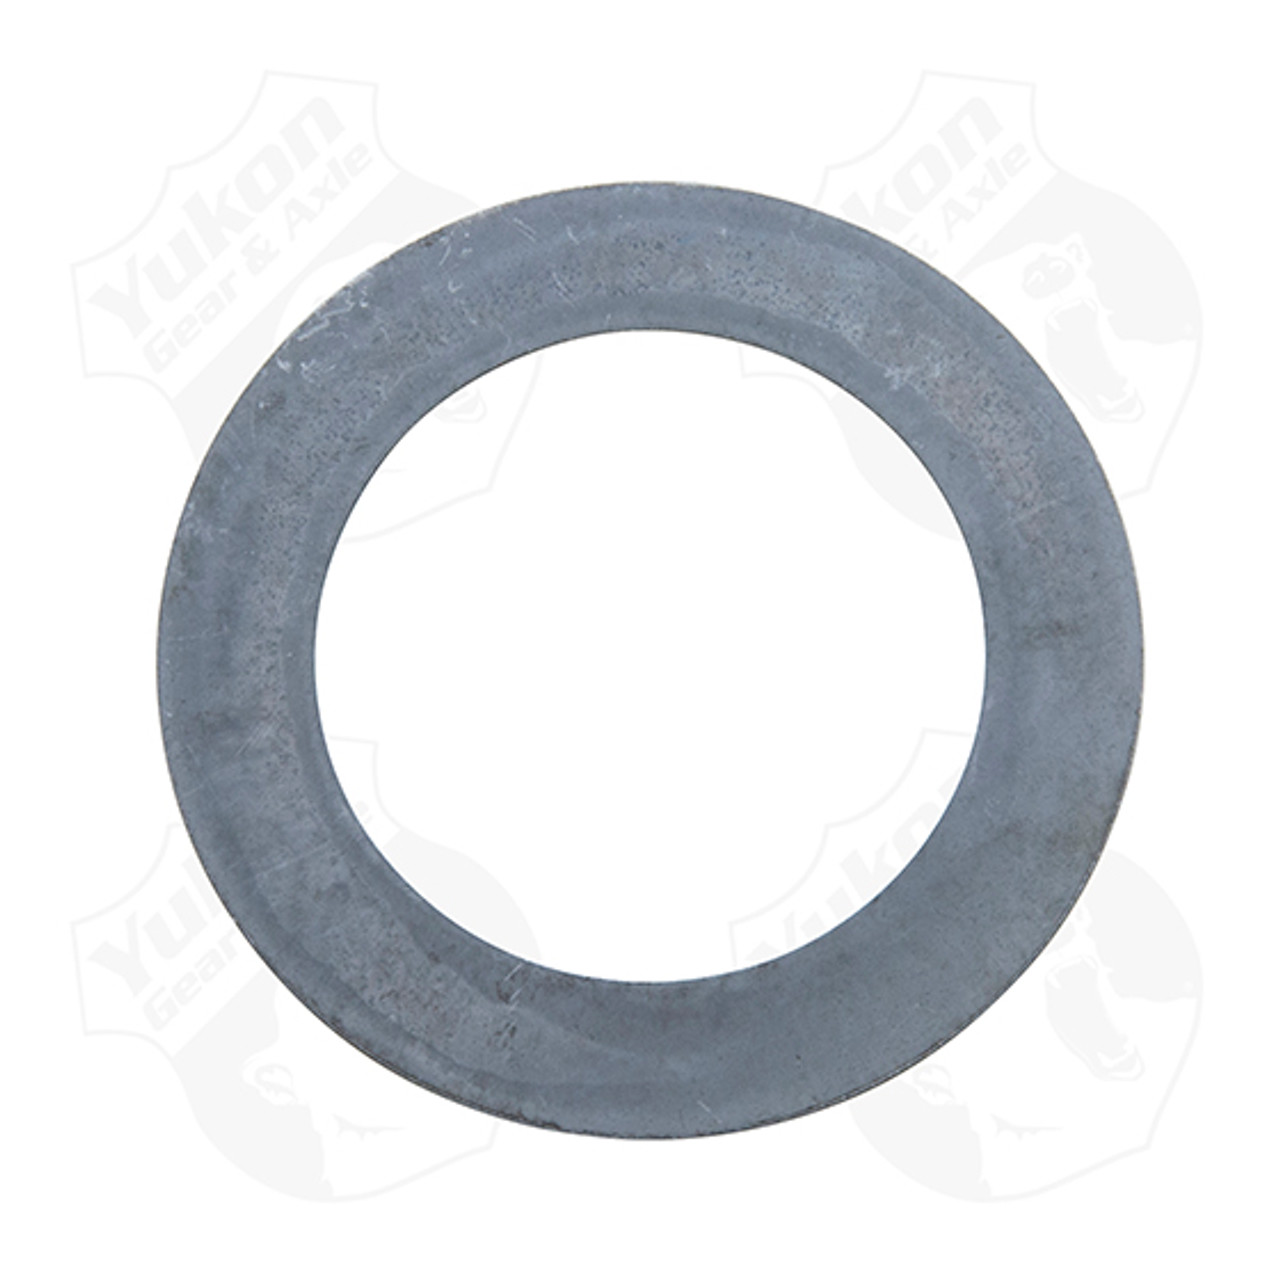 Standard Open side gear and thrust washer for 7.5" Ford.